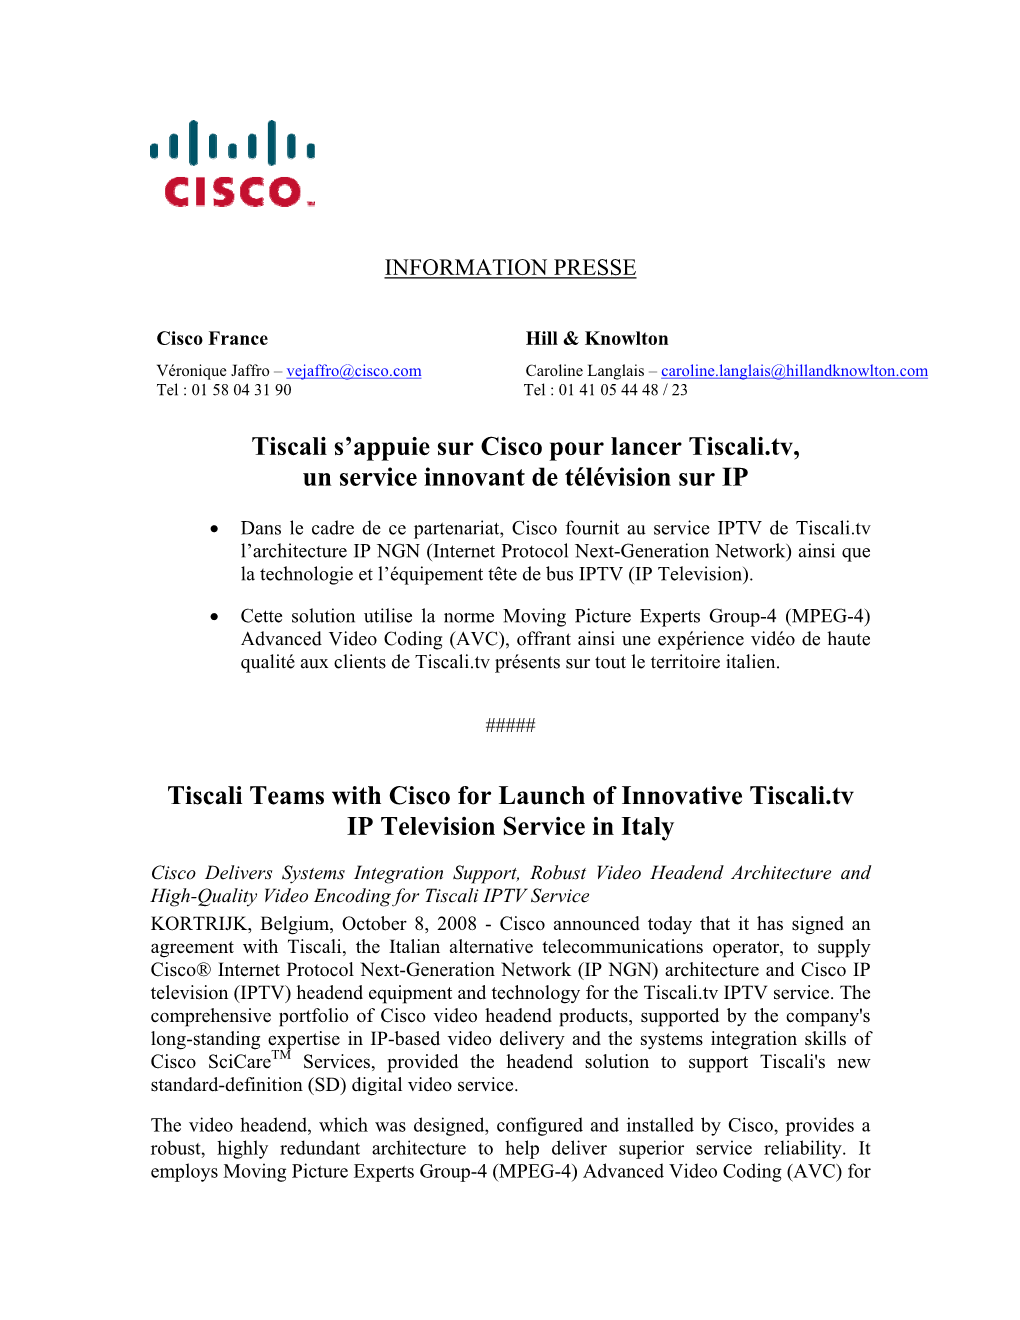 Tiscali Teams with Cisco for Launch of Innovative Tiscali.Tv IP Television Service in Italy